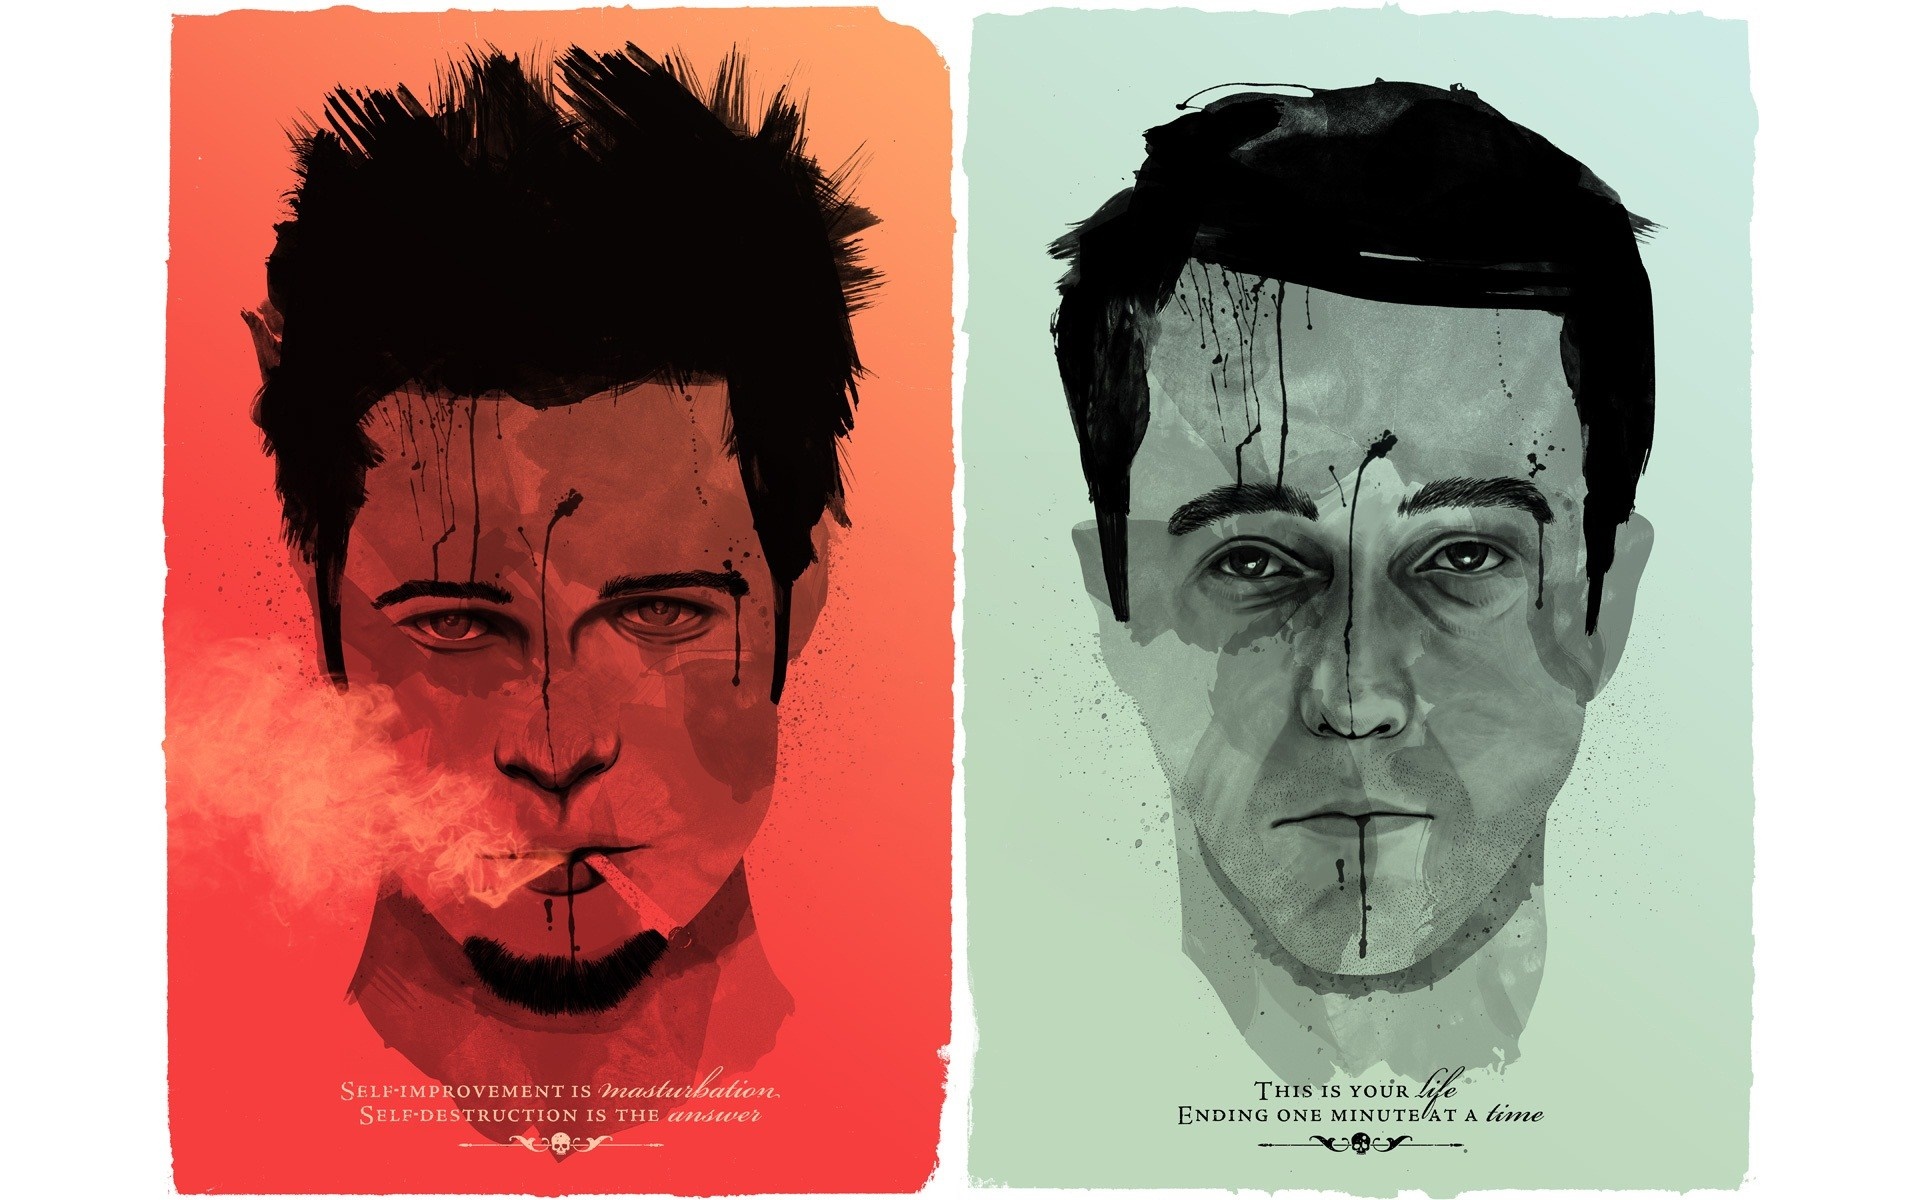 face, drawing, illustration, poster, Fight Club, head, ART, sketch, album cover Gallery HD Wallpaper